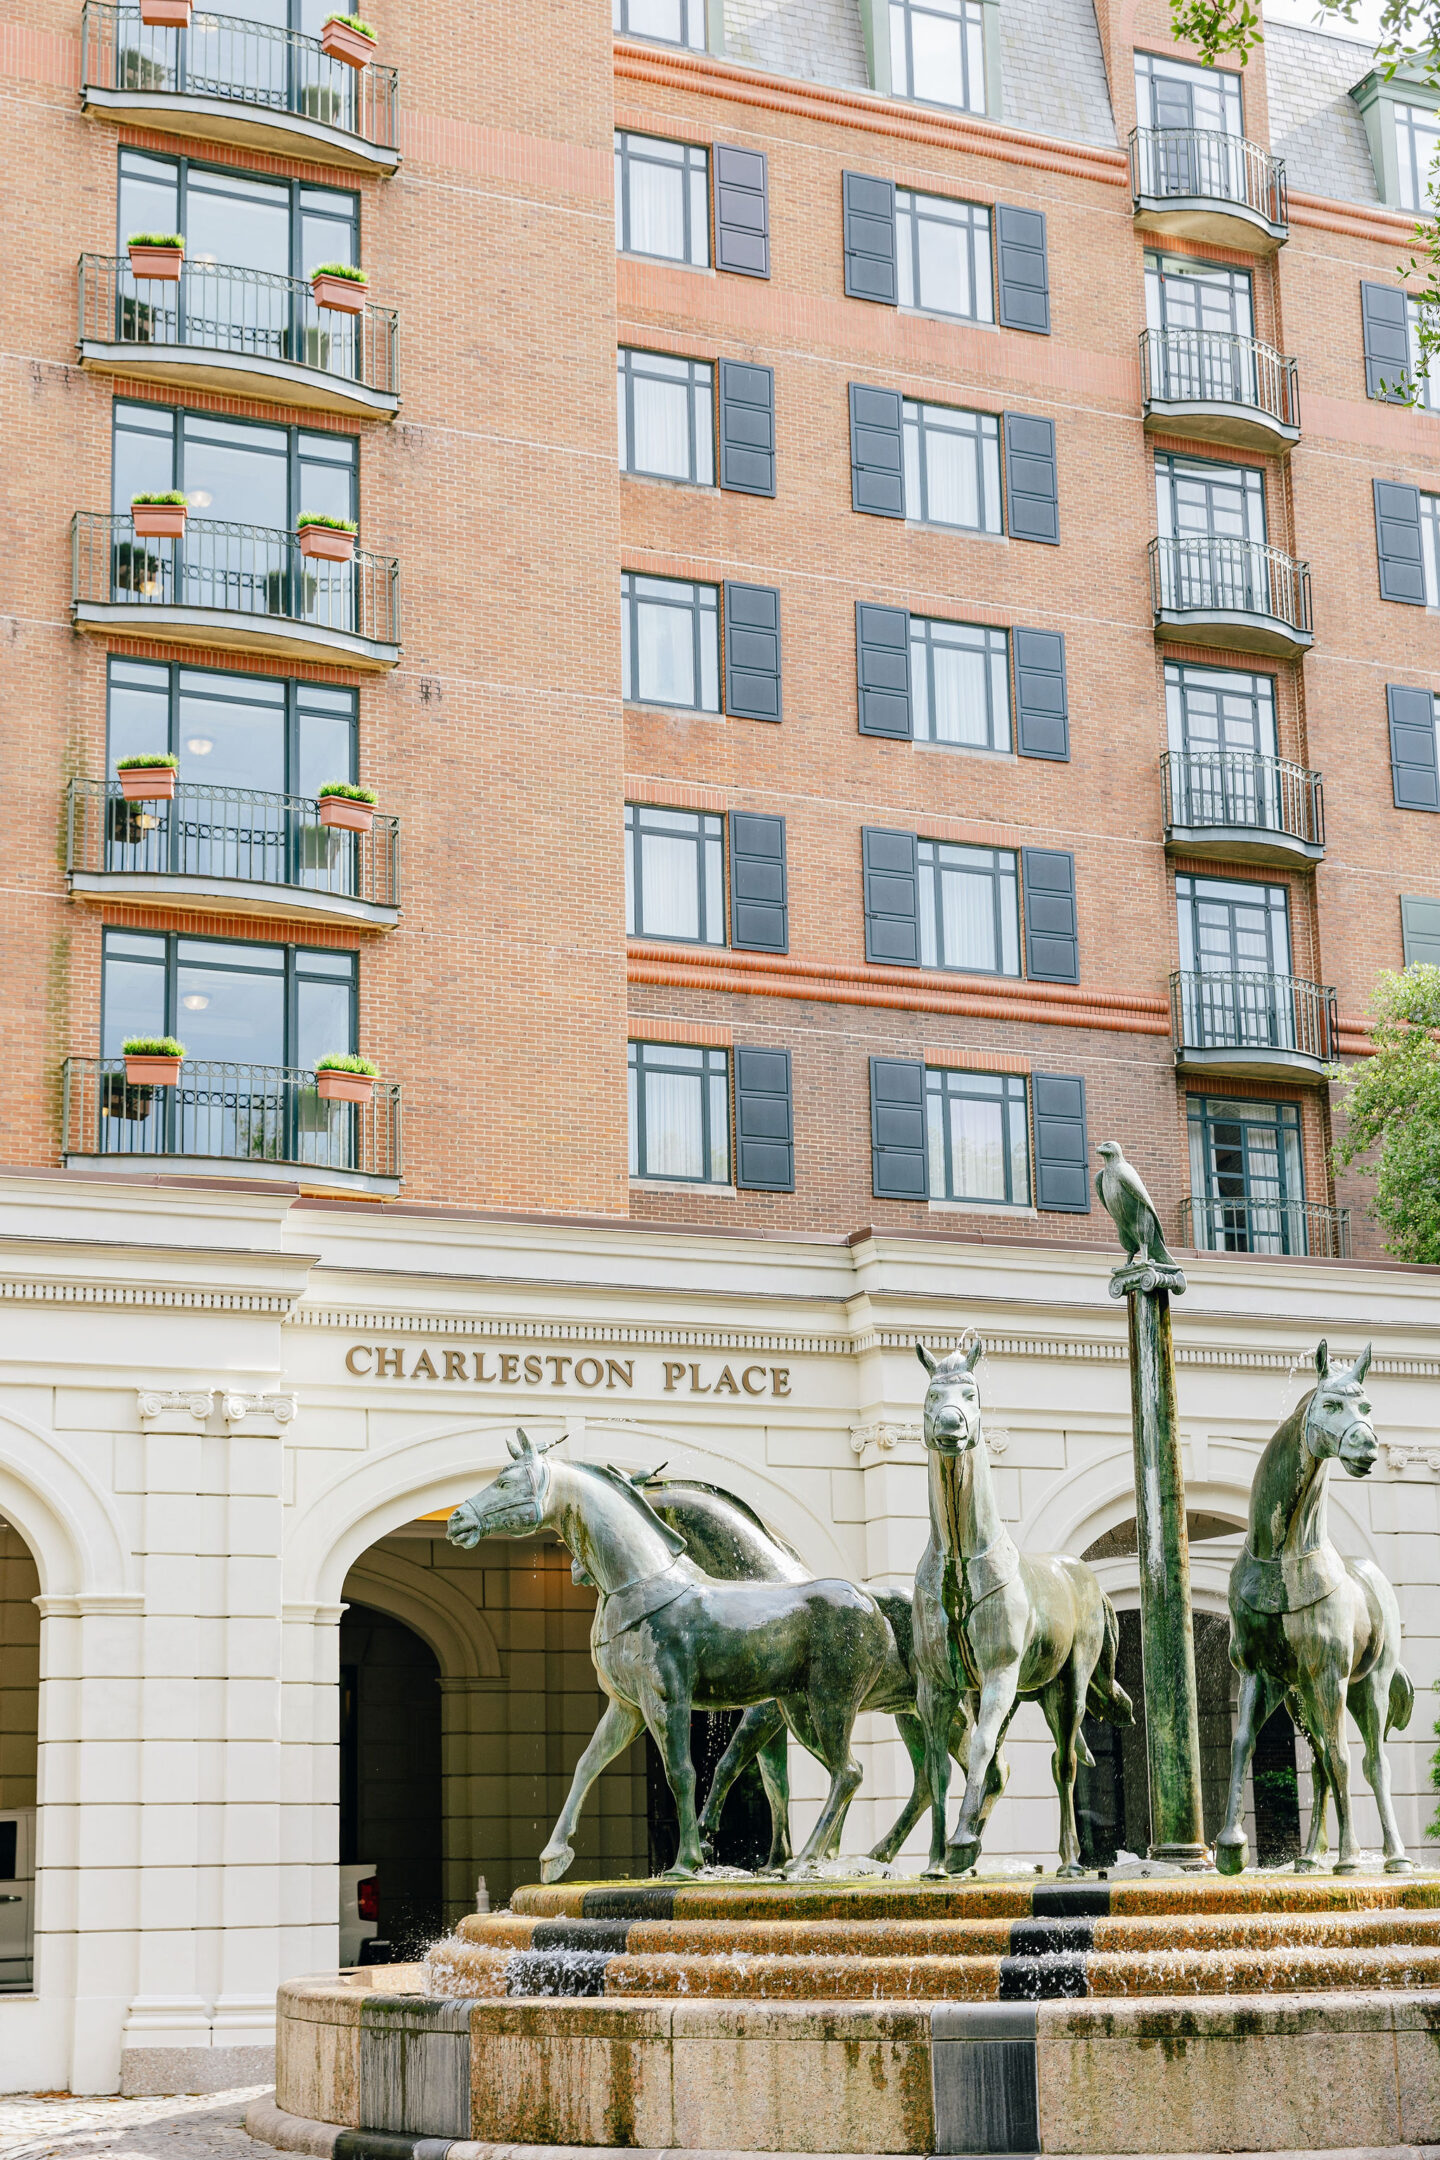 My Weekend Stay at The Belmond Charleston Place Hotel